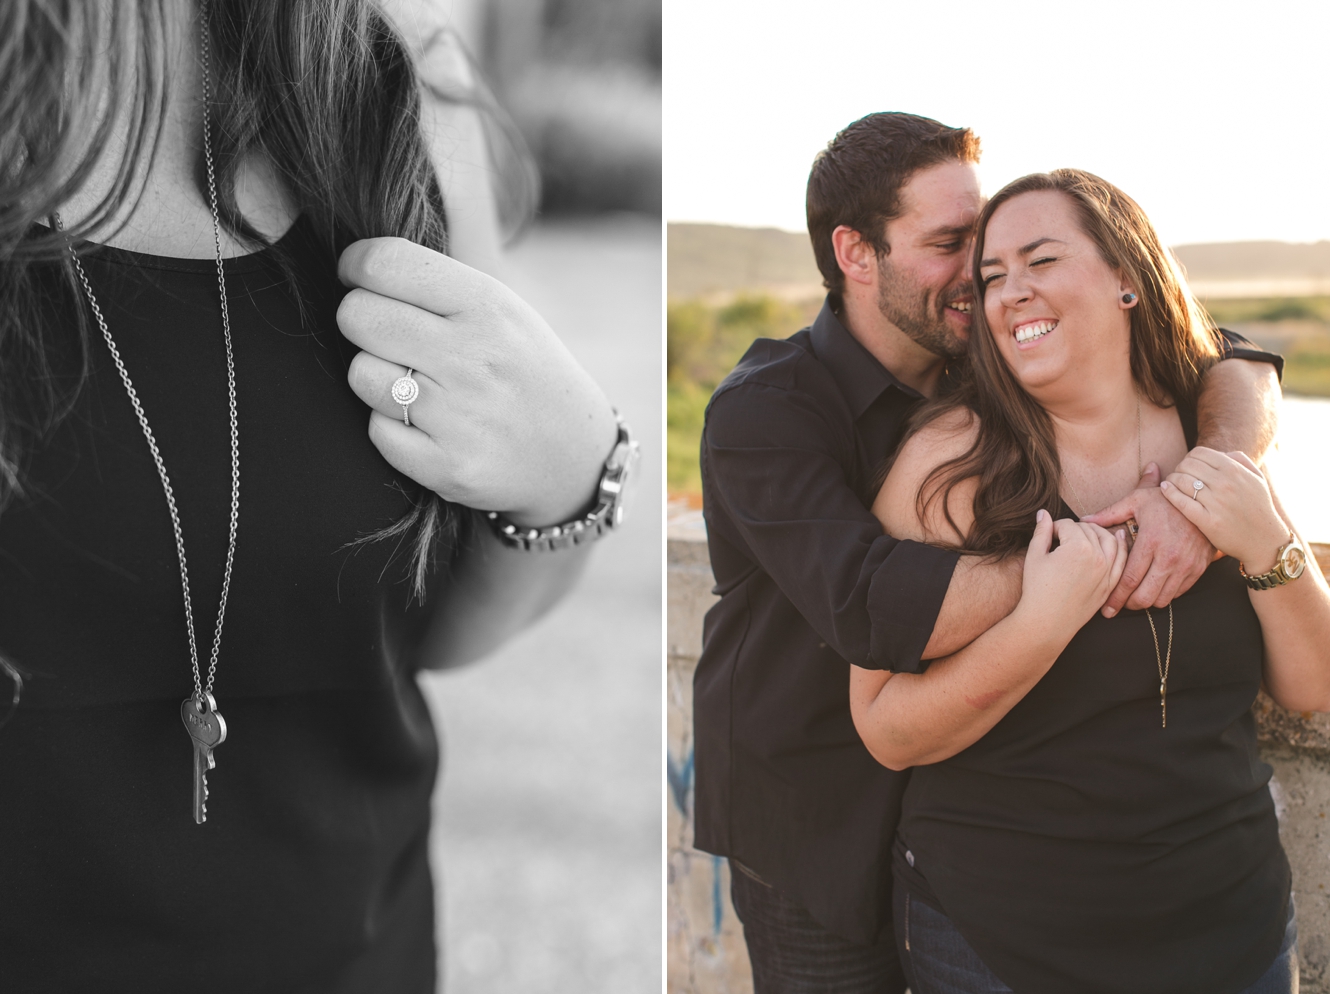 How to pose couples engagement session photo